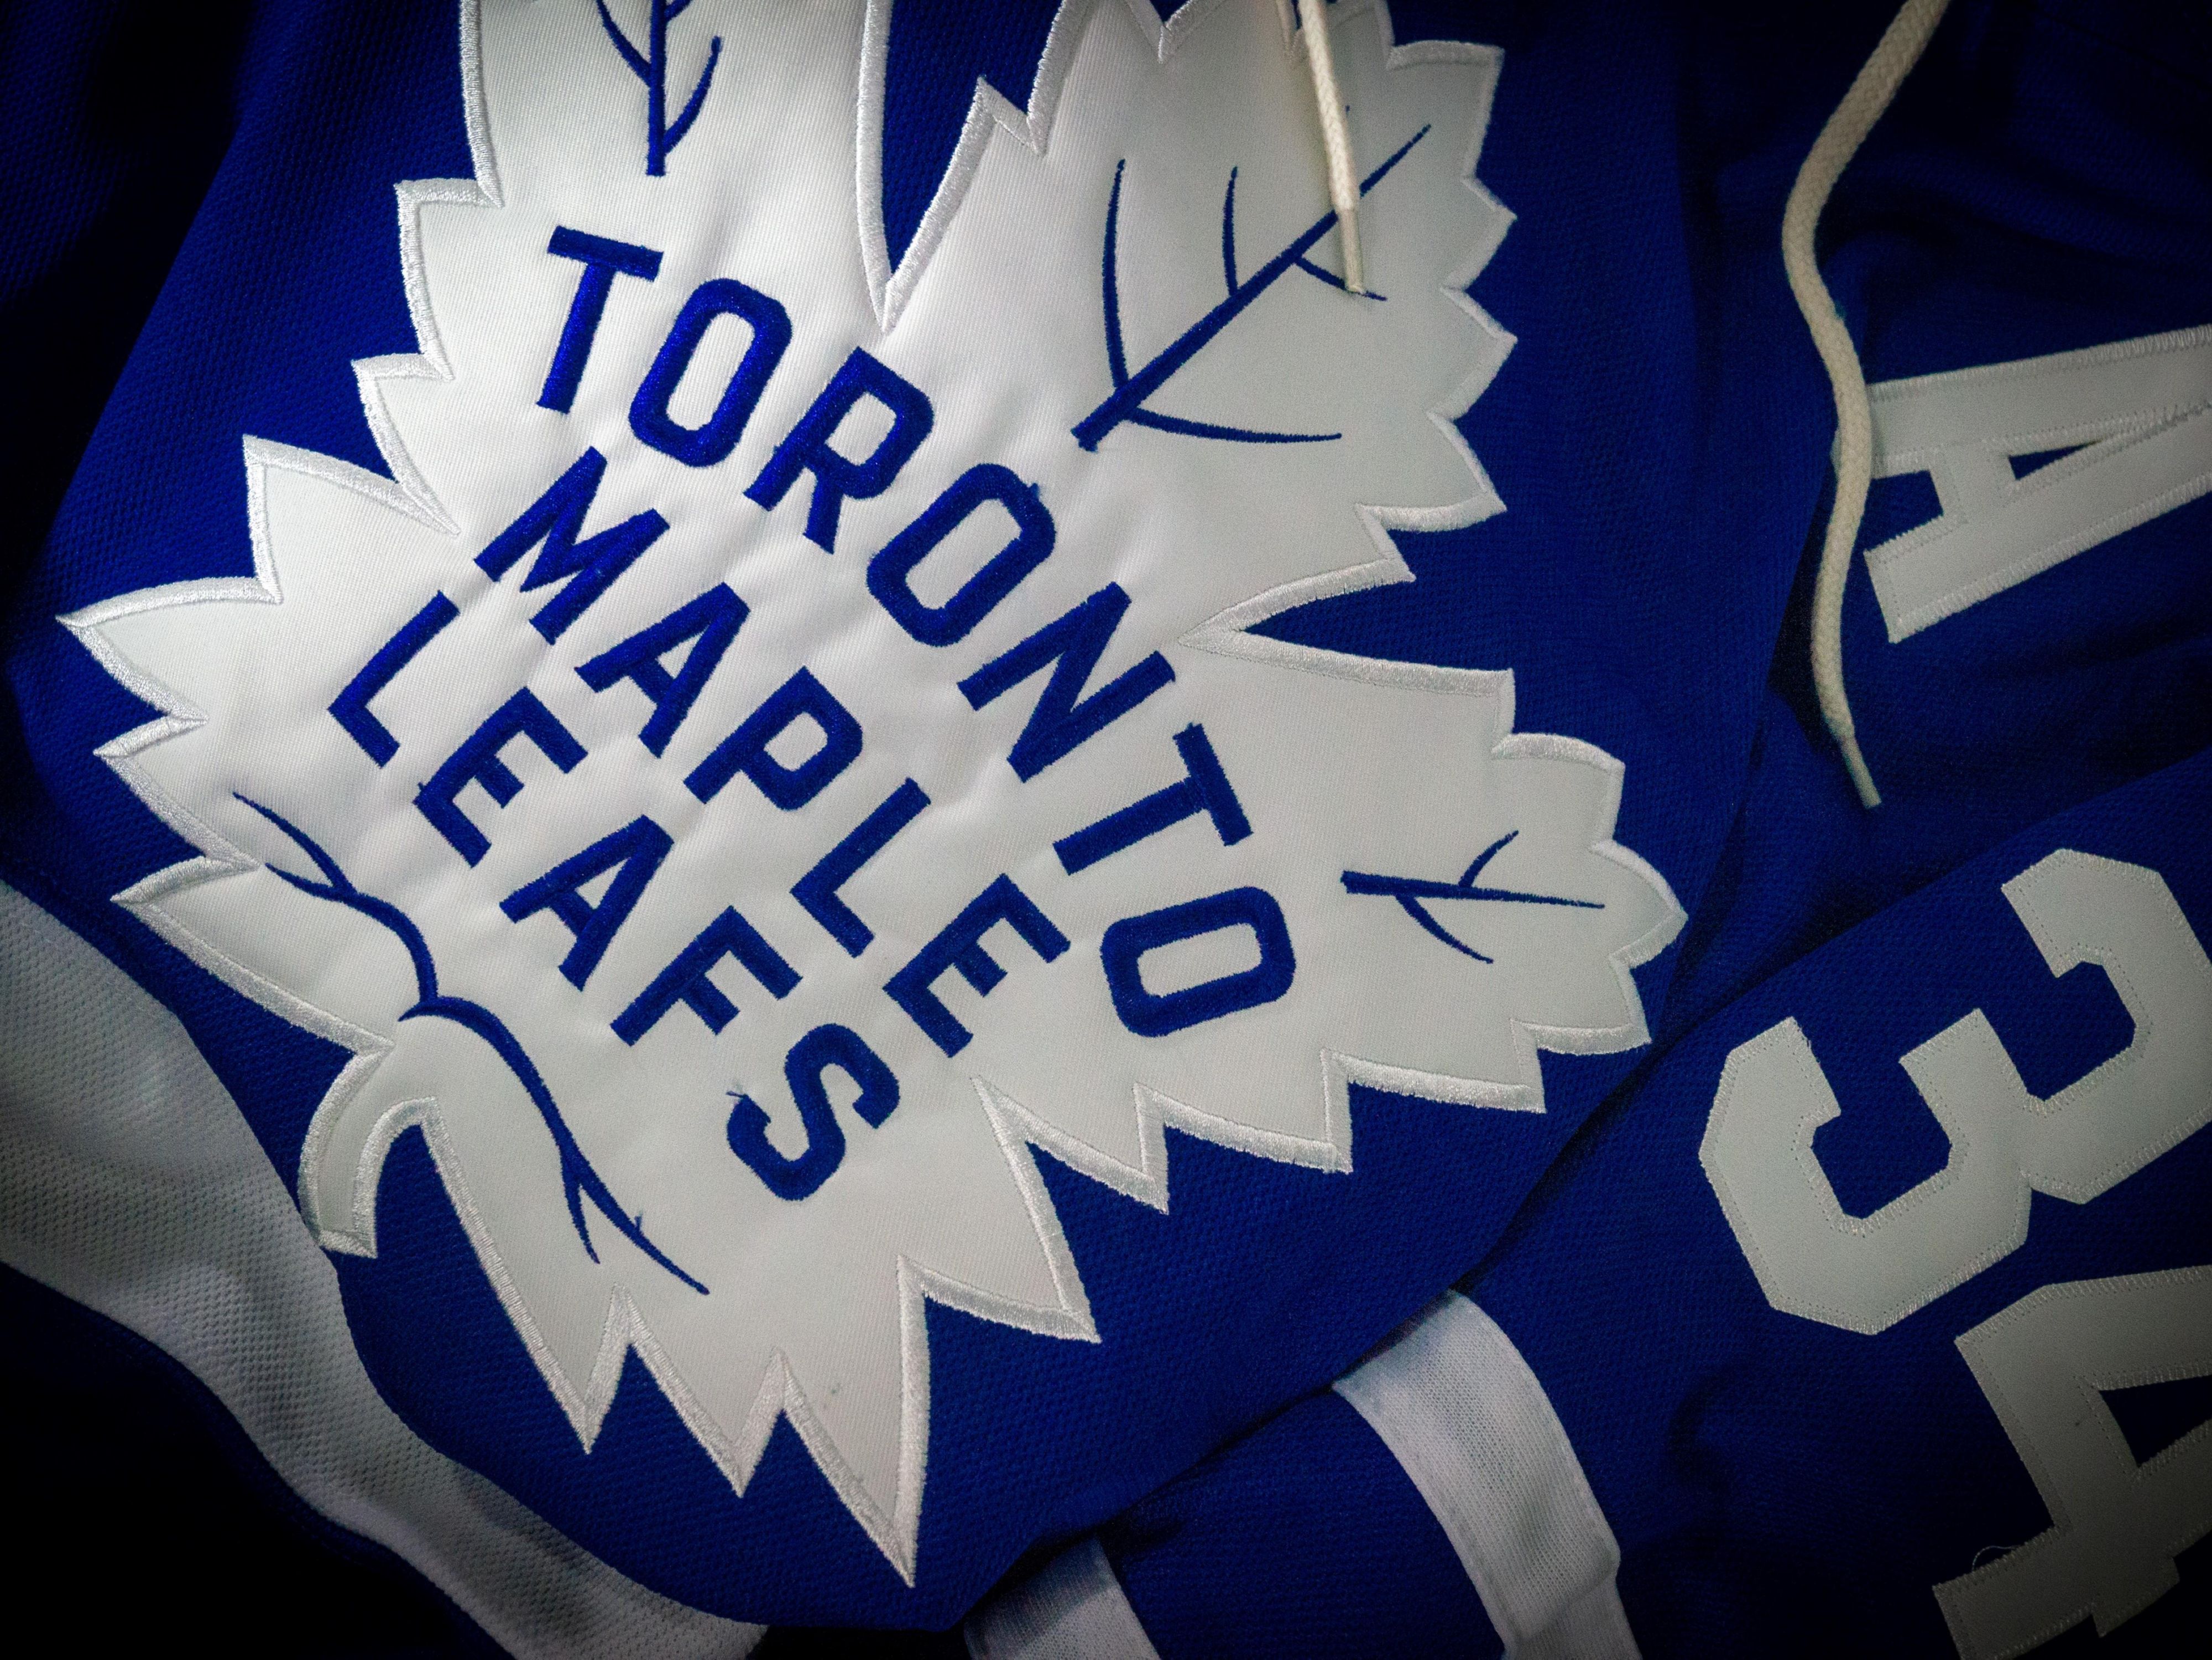 Cheer on your Toronto Maple Leafs